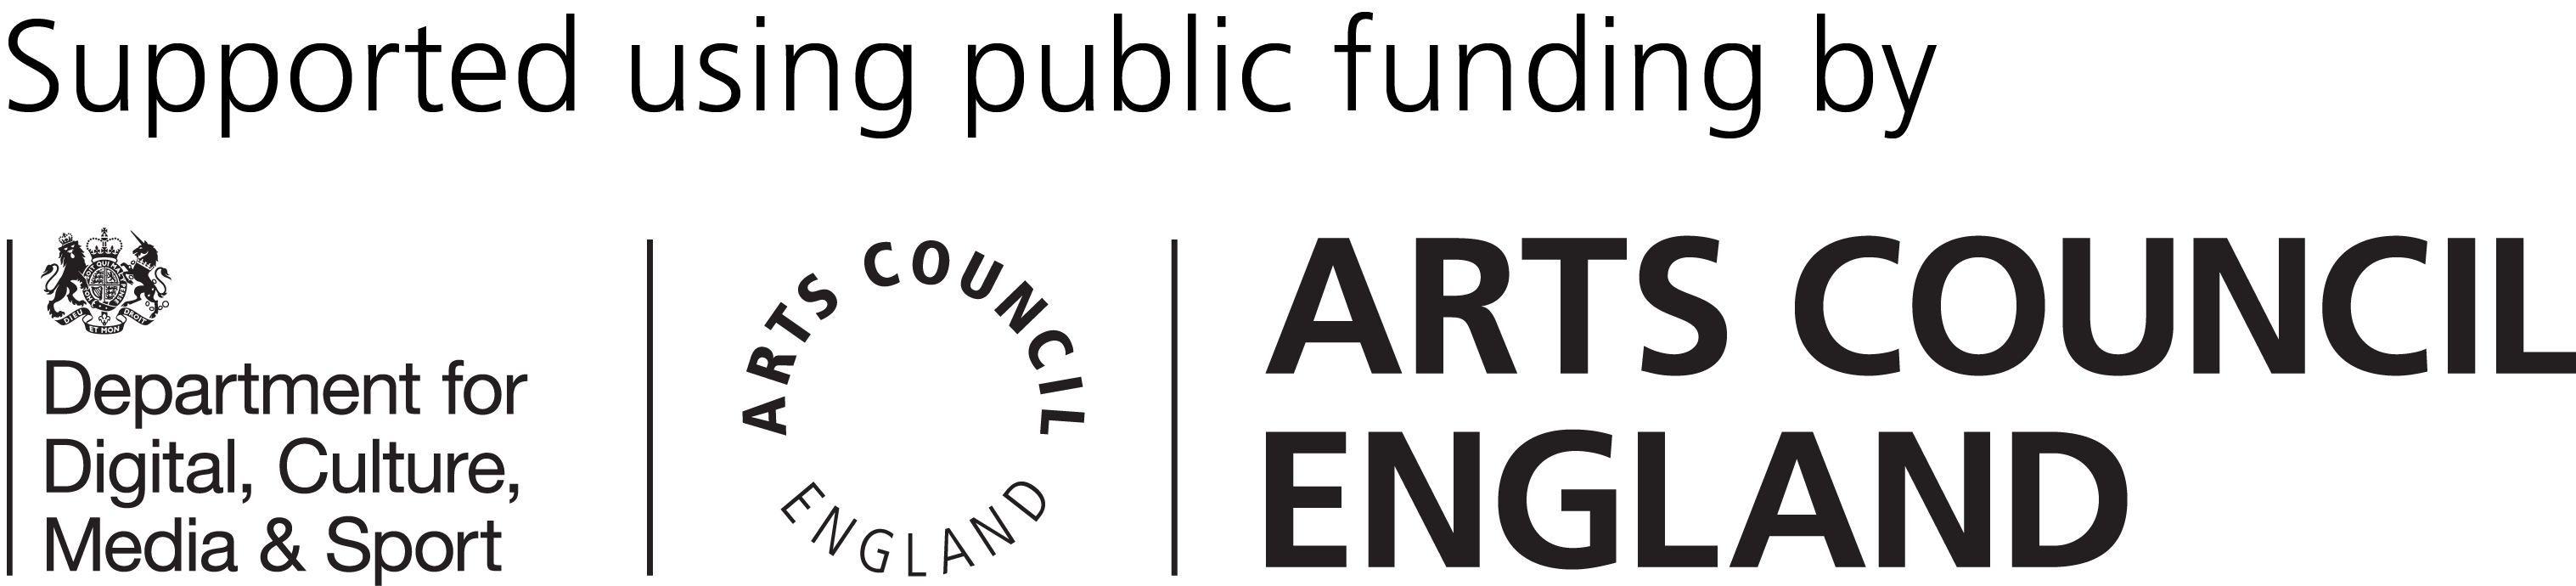 Supported using public funding by Department for Culture, Media and Sport and Arts Council England